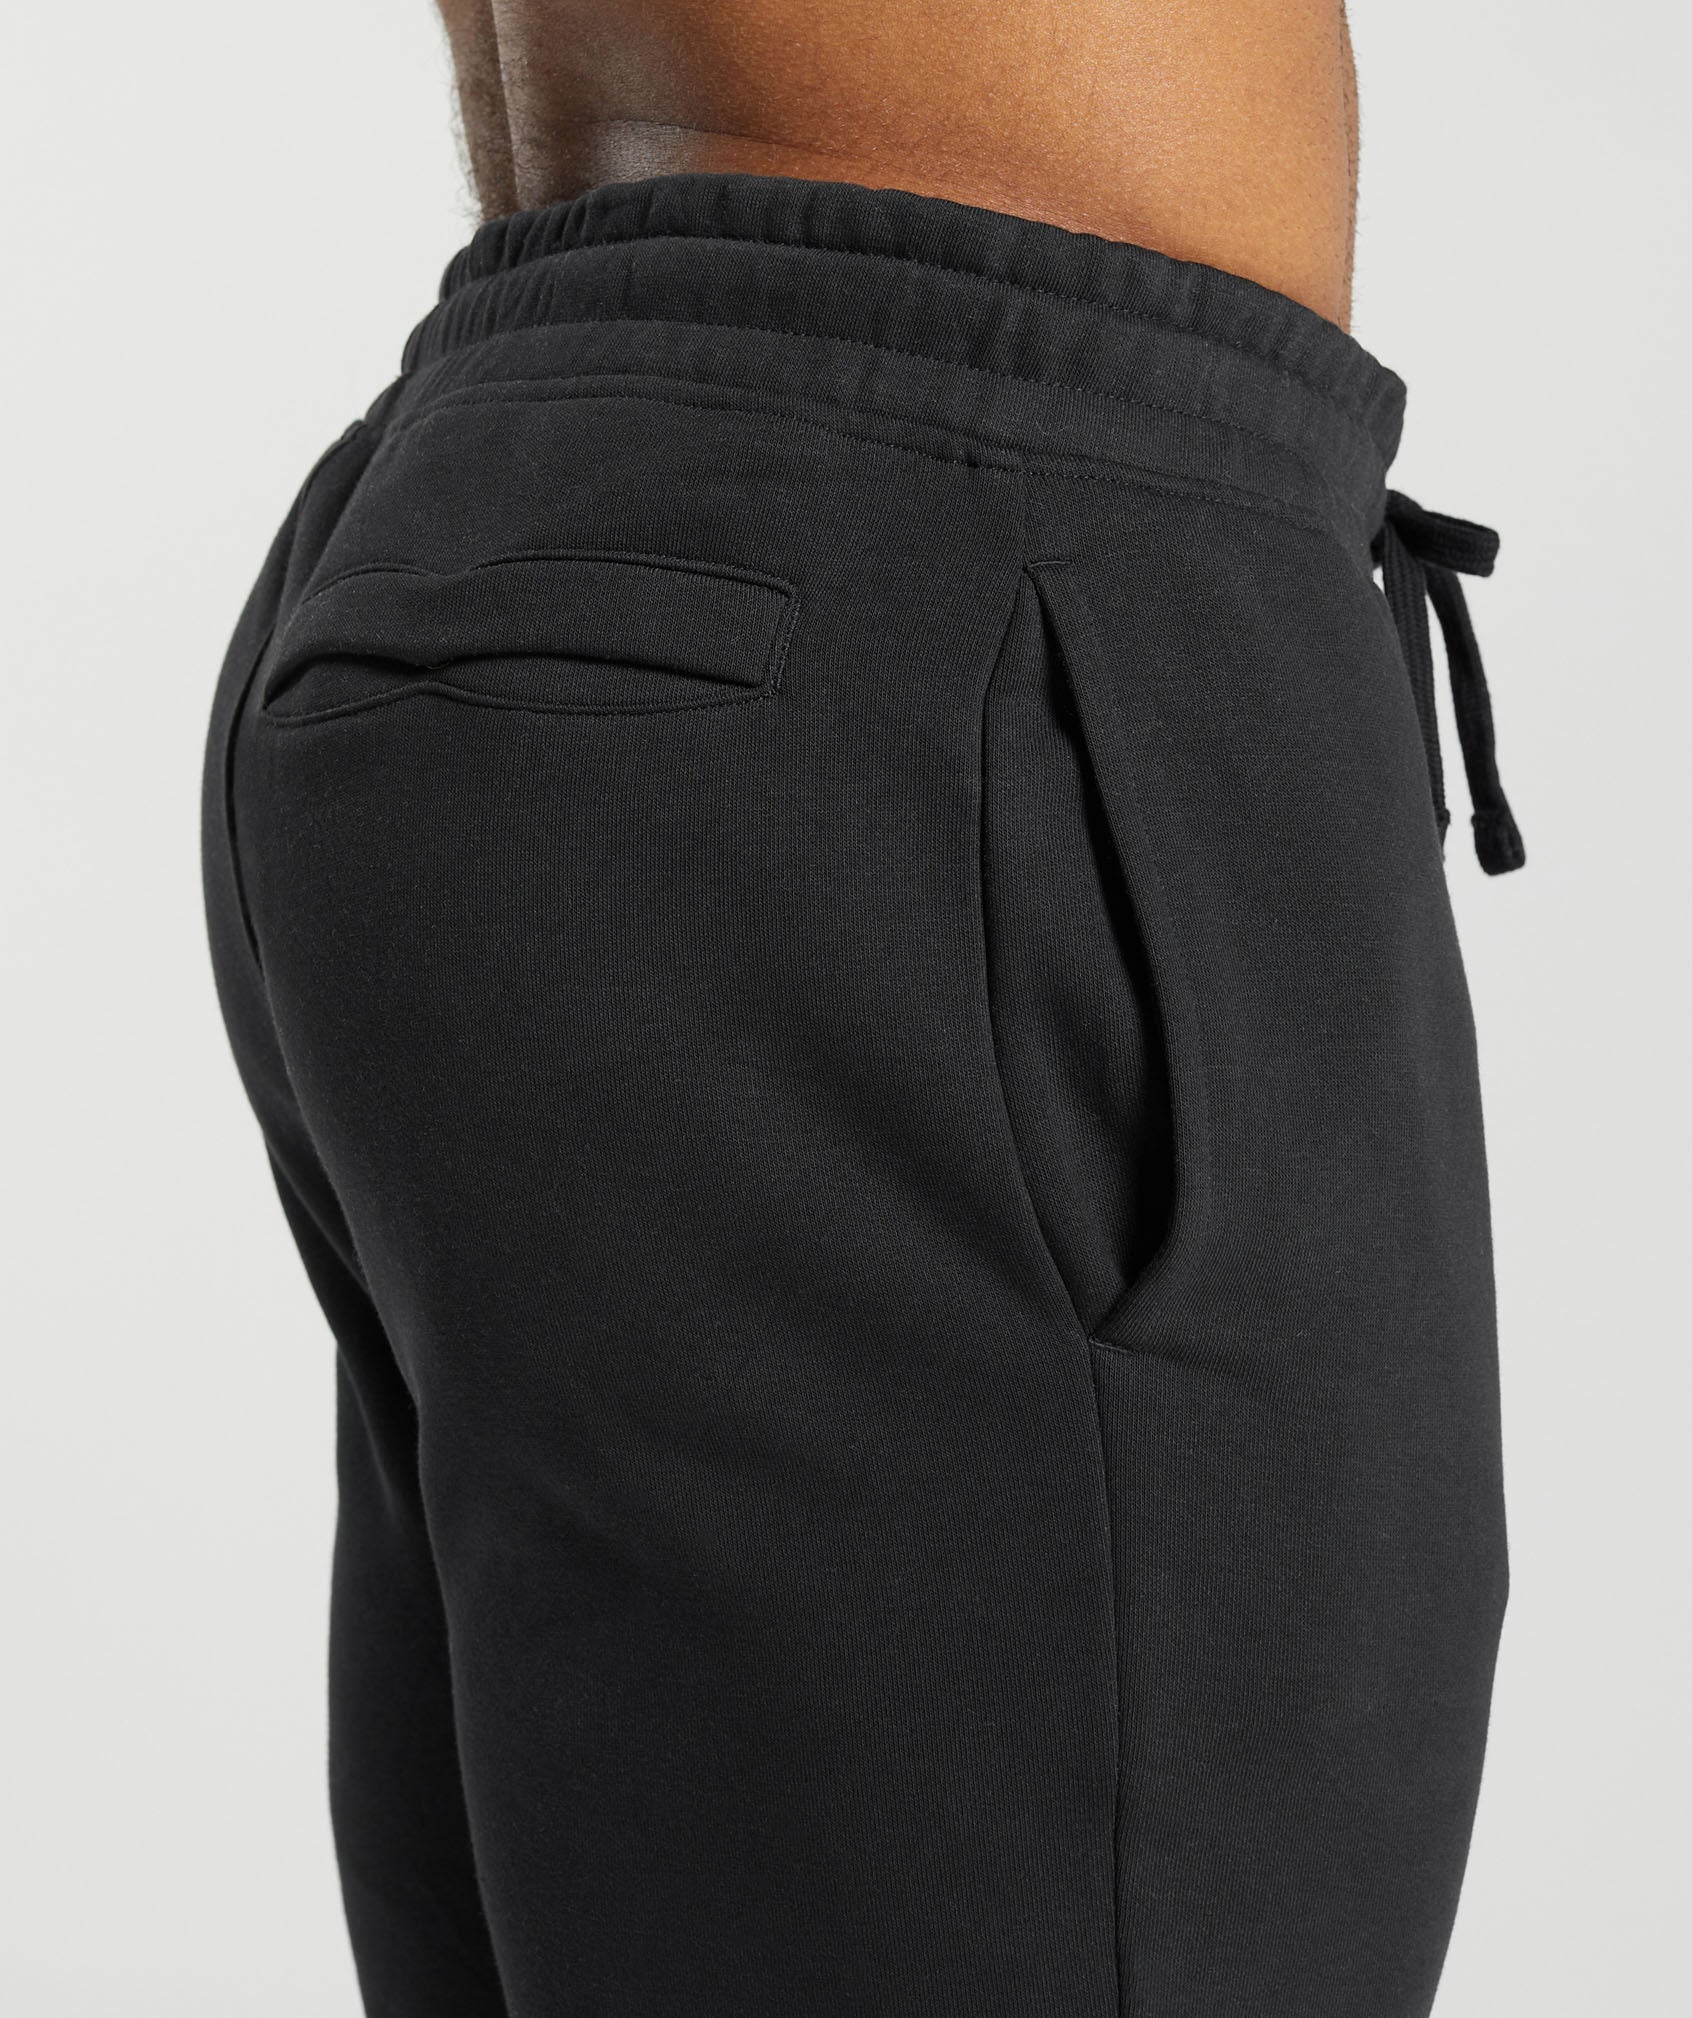 Crest Joggers in Black - view 5